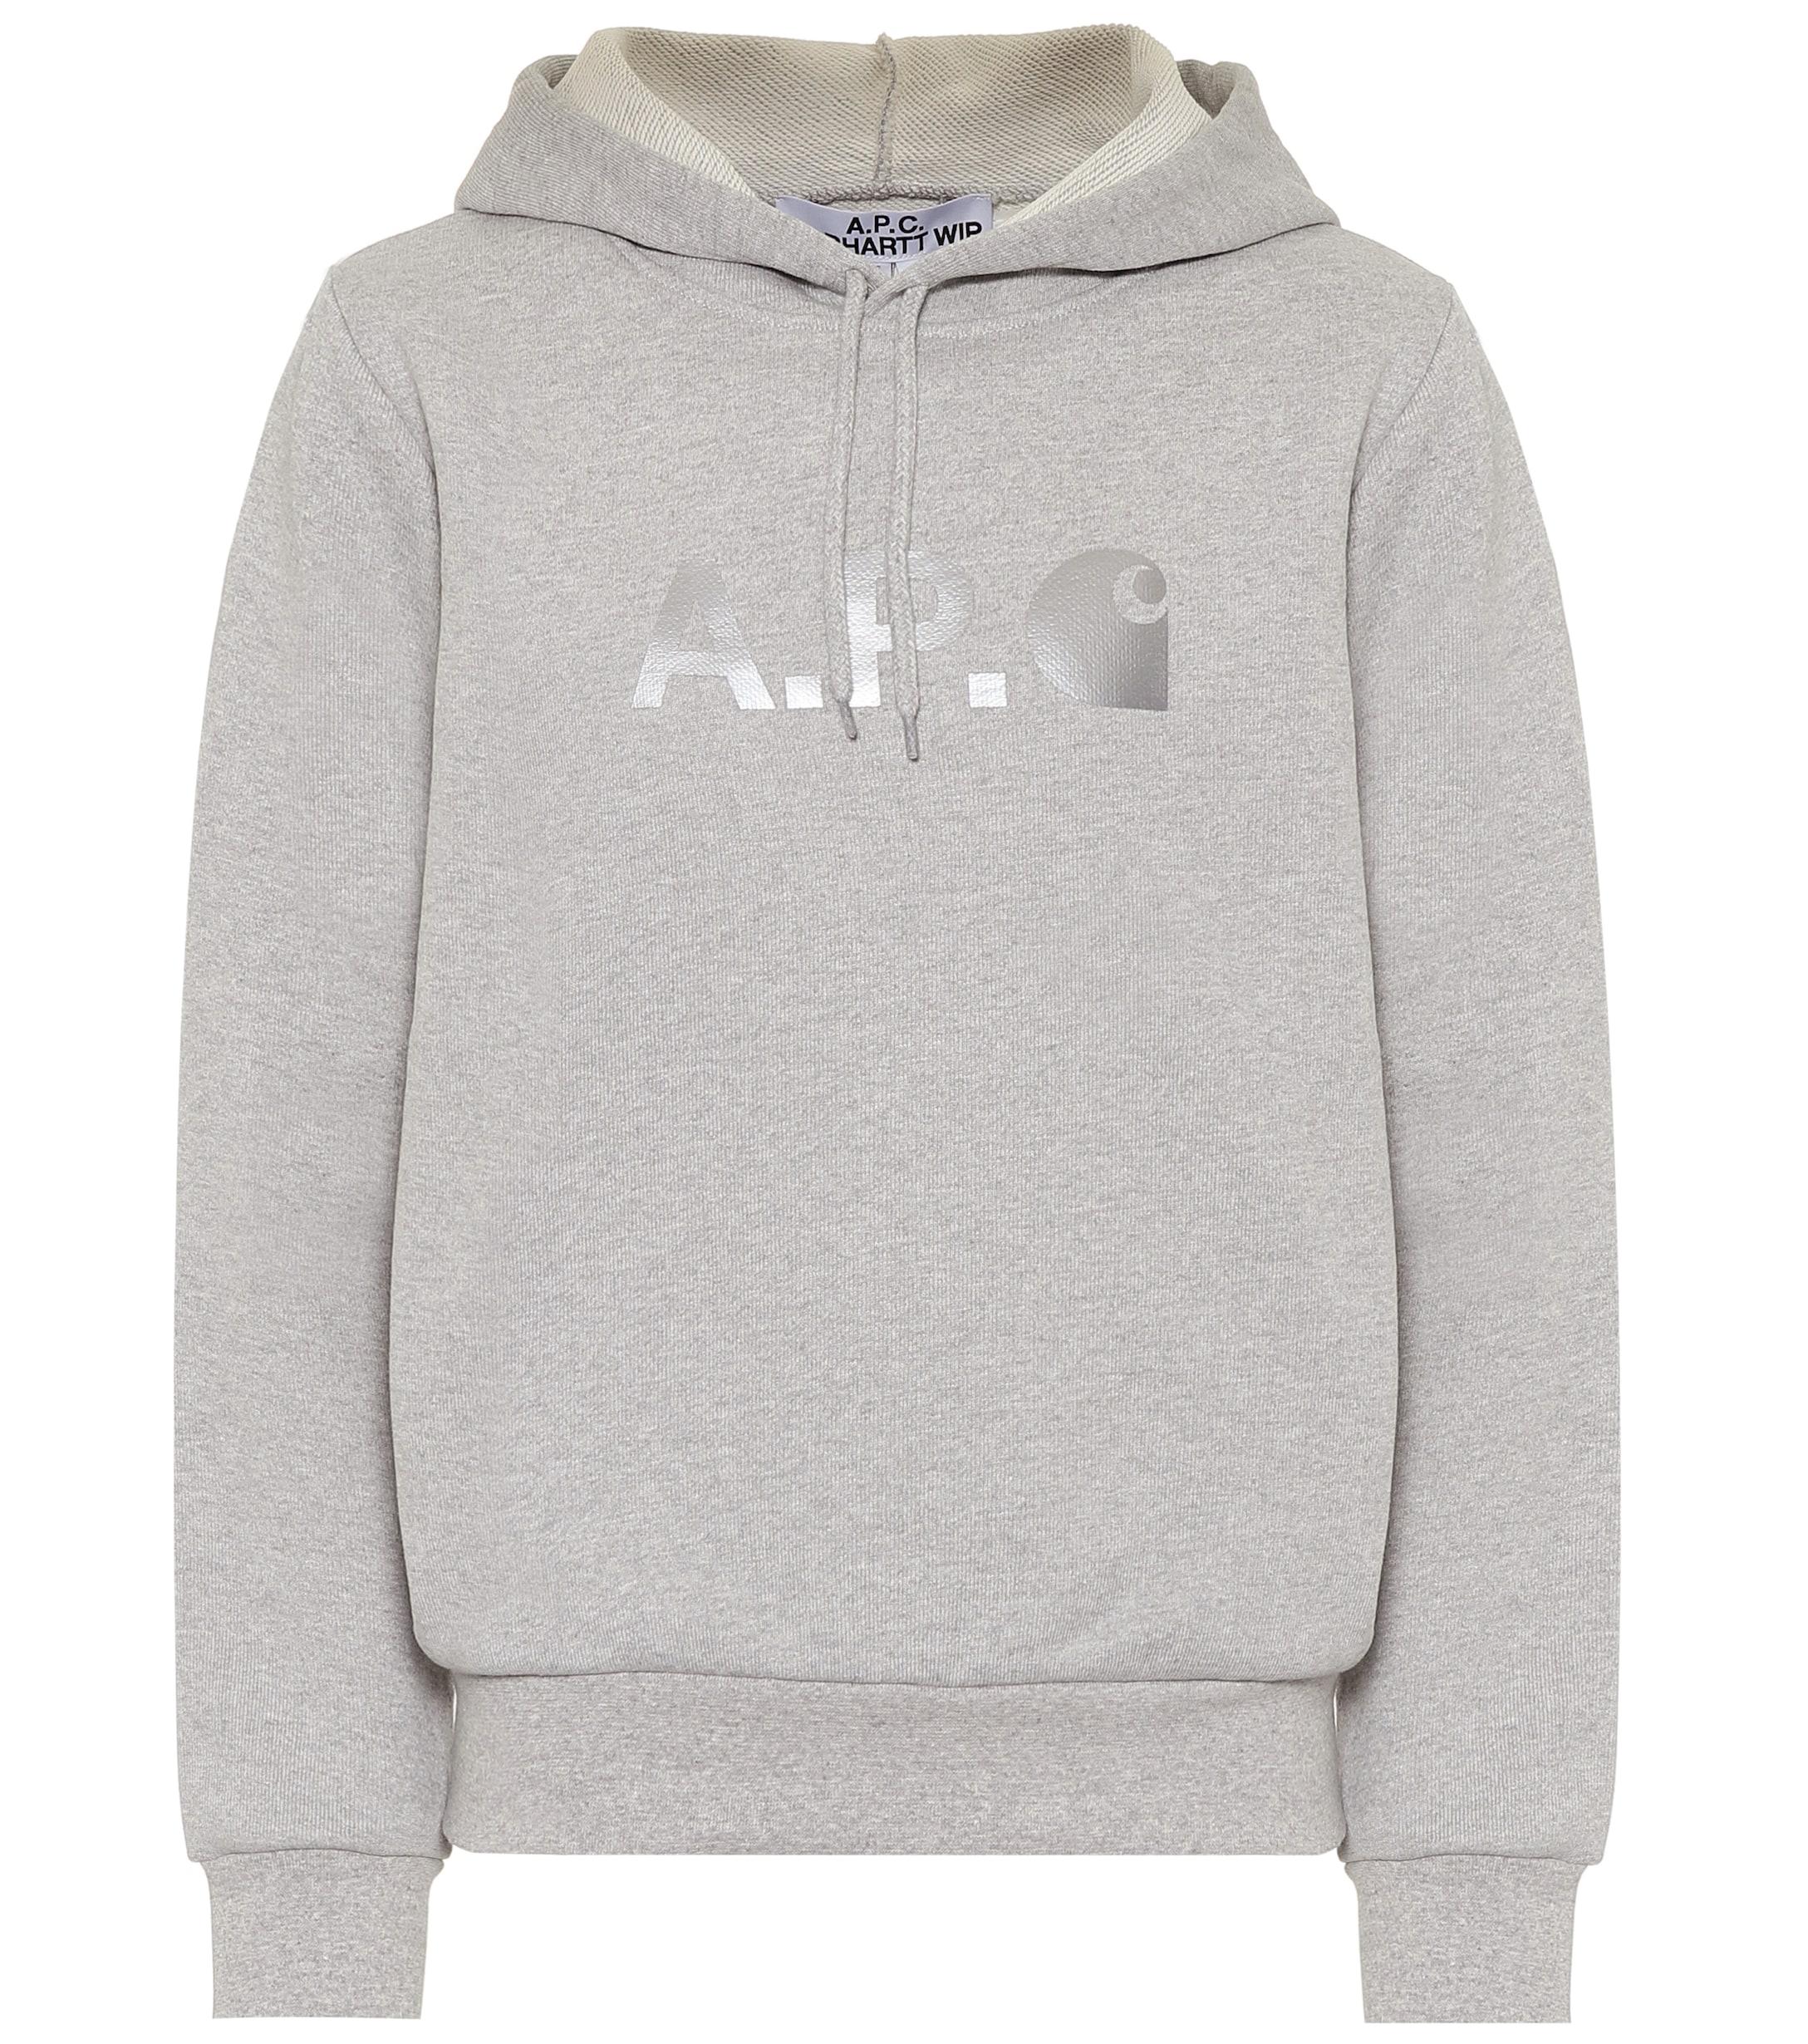 A.P.C. Cotton Carhartt Stash Hoodie in Grey (Gray) - Save 27% - Lyst